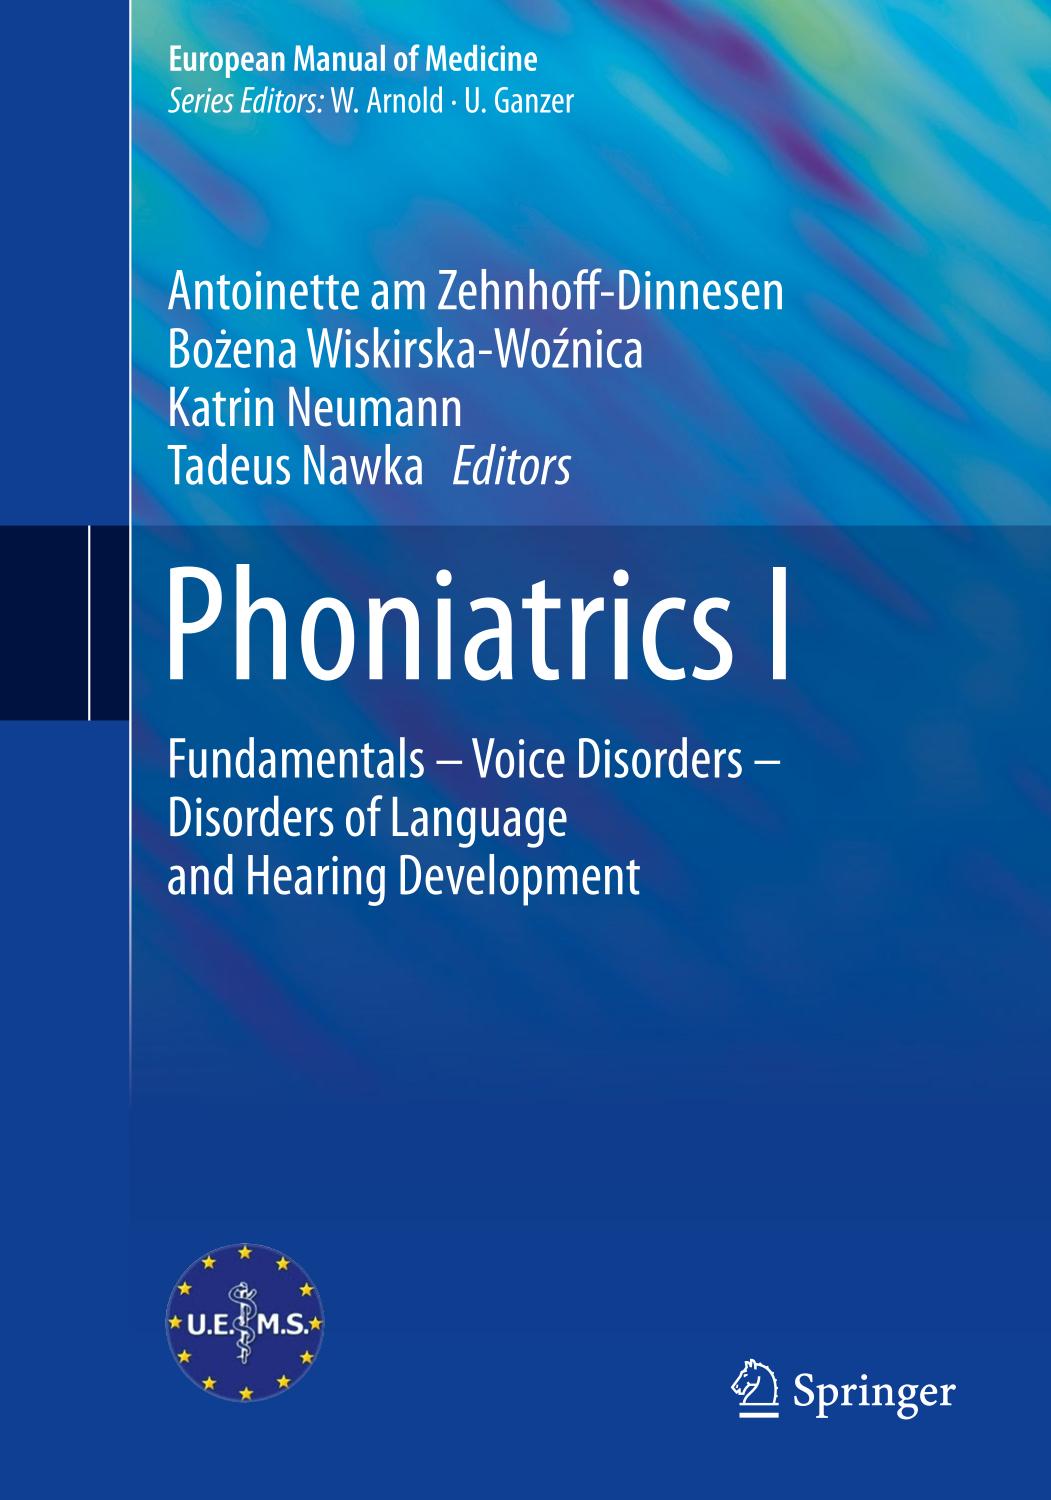 Phoniatrics I : fundamentals, voice disorders, disorders of language and hearing development